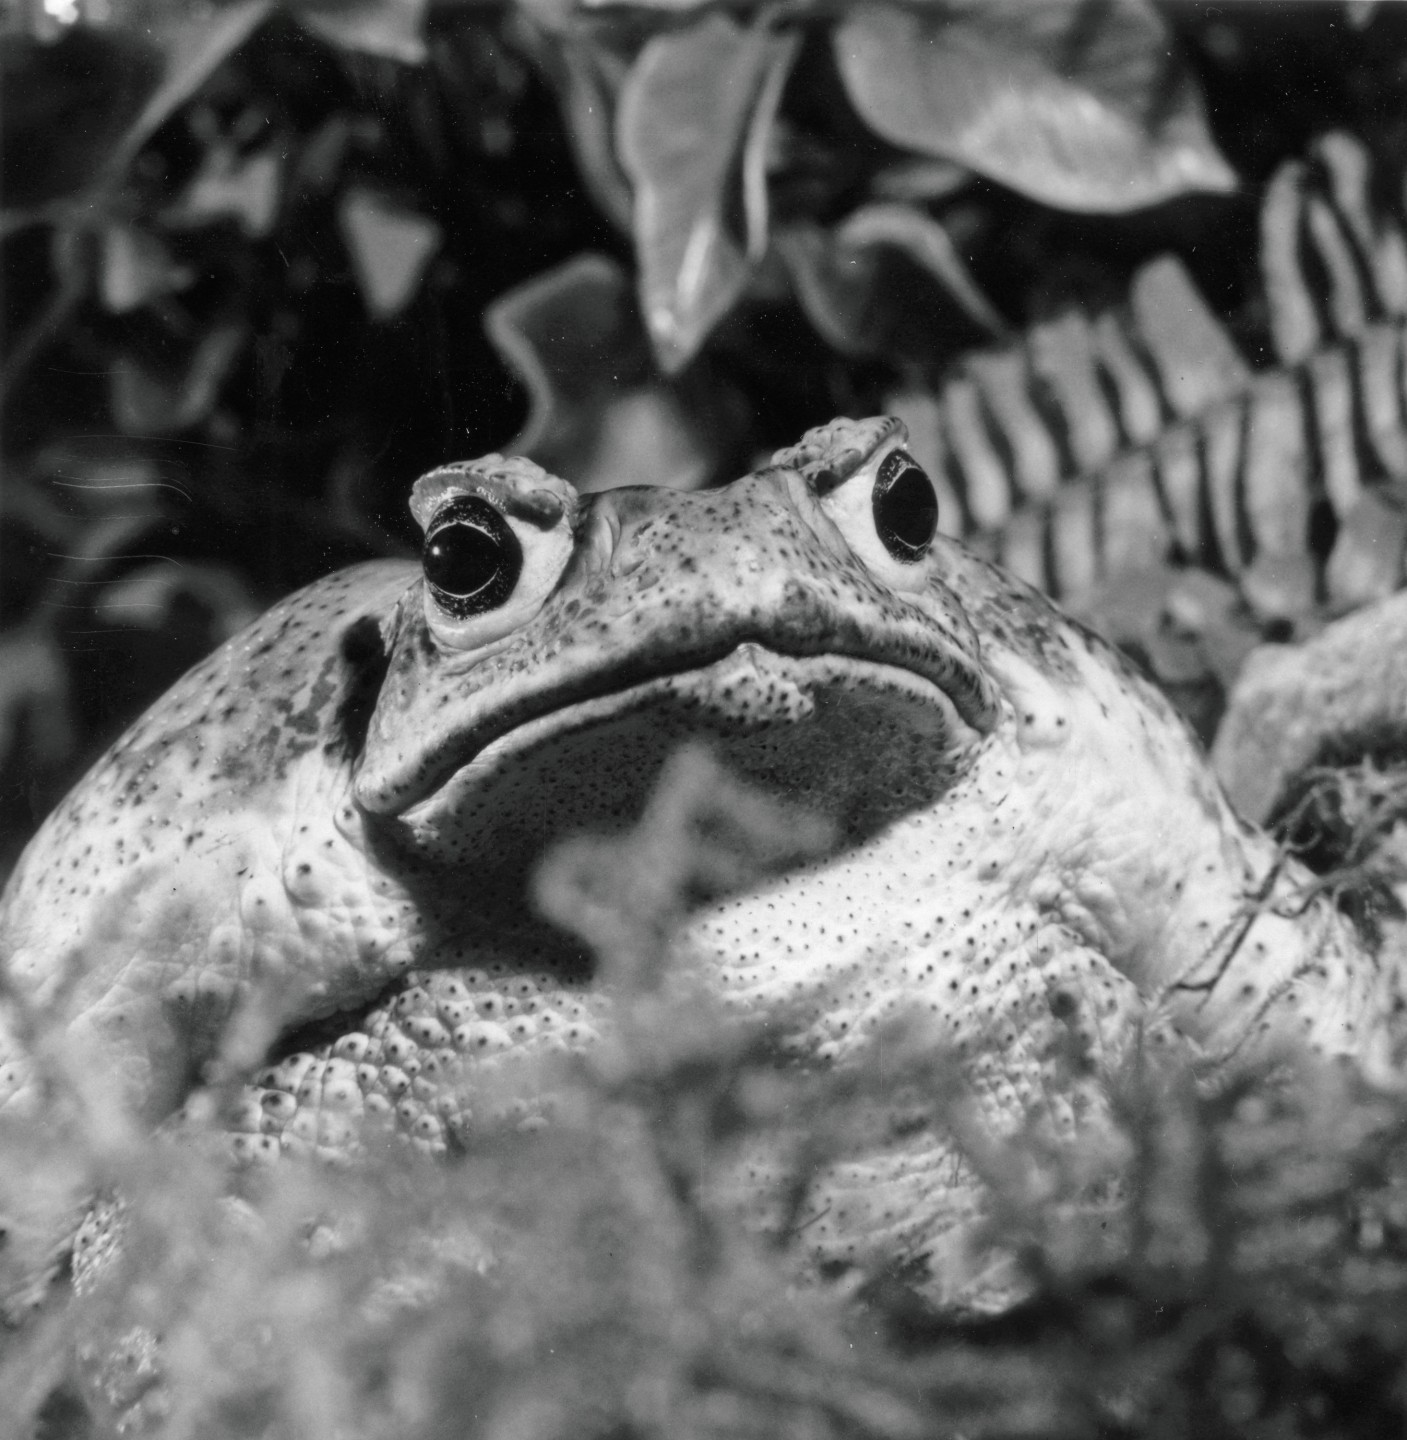 The San Diego Zoo's first amphibian was a marine toad named Tenicatita, after the village near where she was found in southern Mexico. Already an adult when she arrived, Tenicatita lived at the Zoo's Reptile House for more than 16 years.